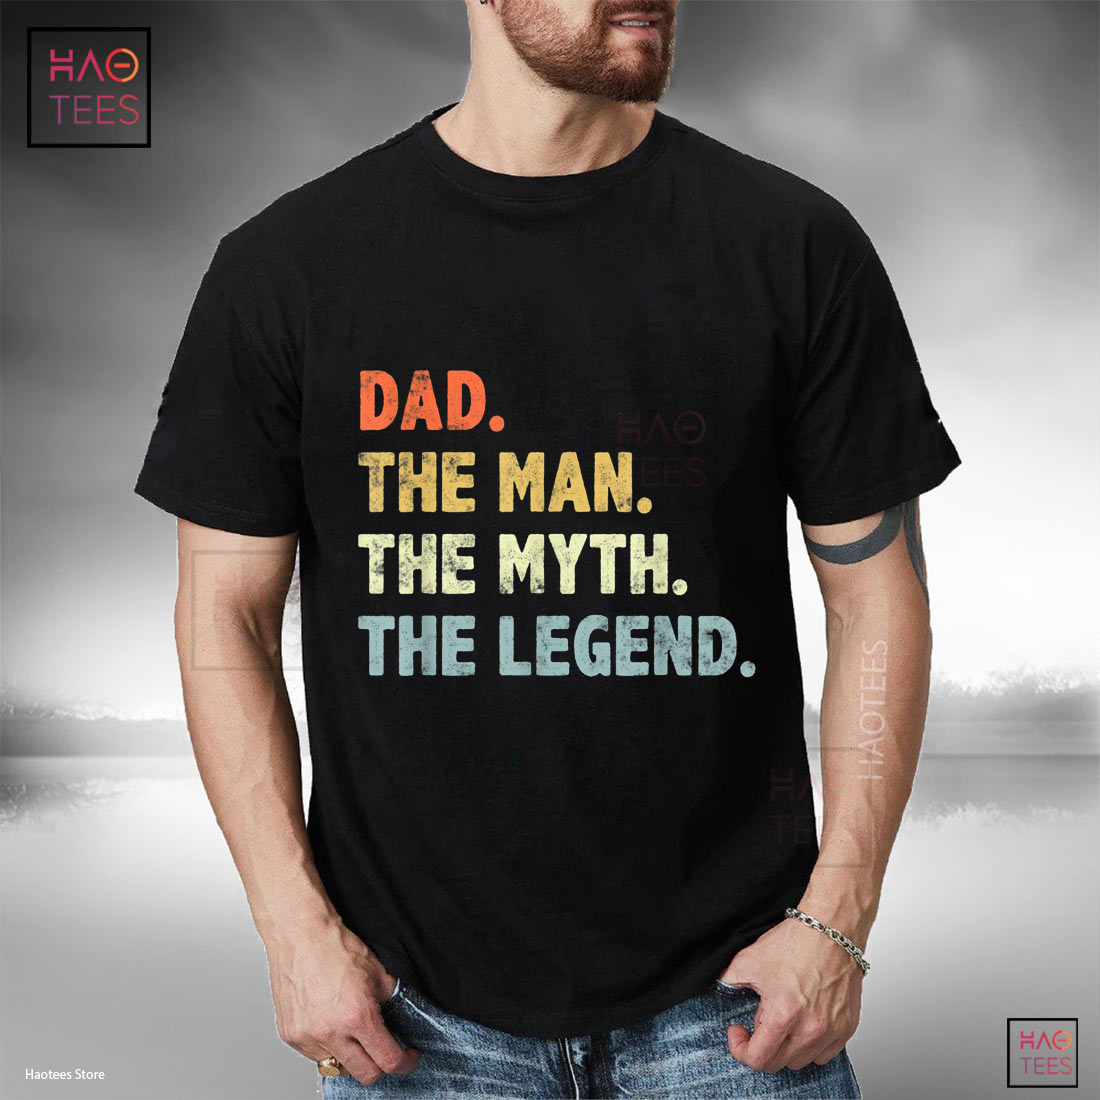 Best Idea for Father's Day Shirt PaPa Perfectly T-Shirt Papa The Man The Myth T-Shirt Shirt For Father's Day Personalized shirt